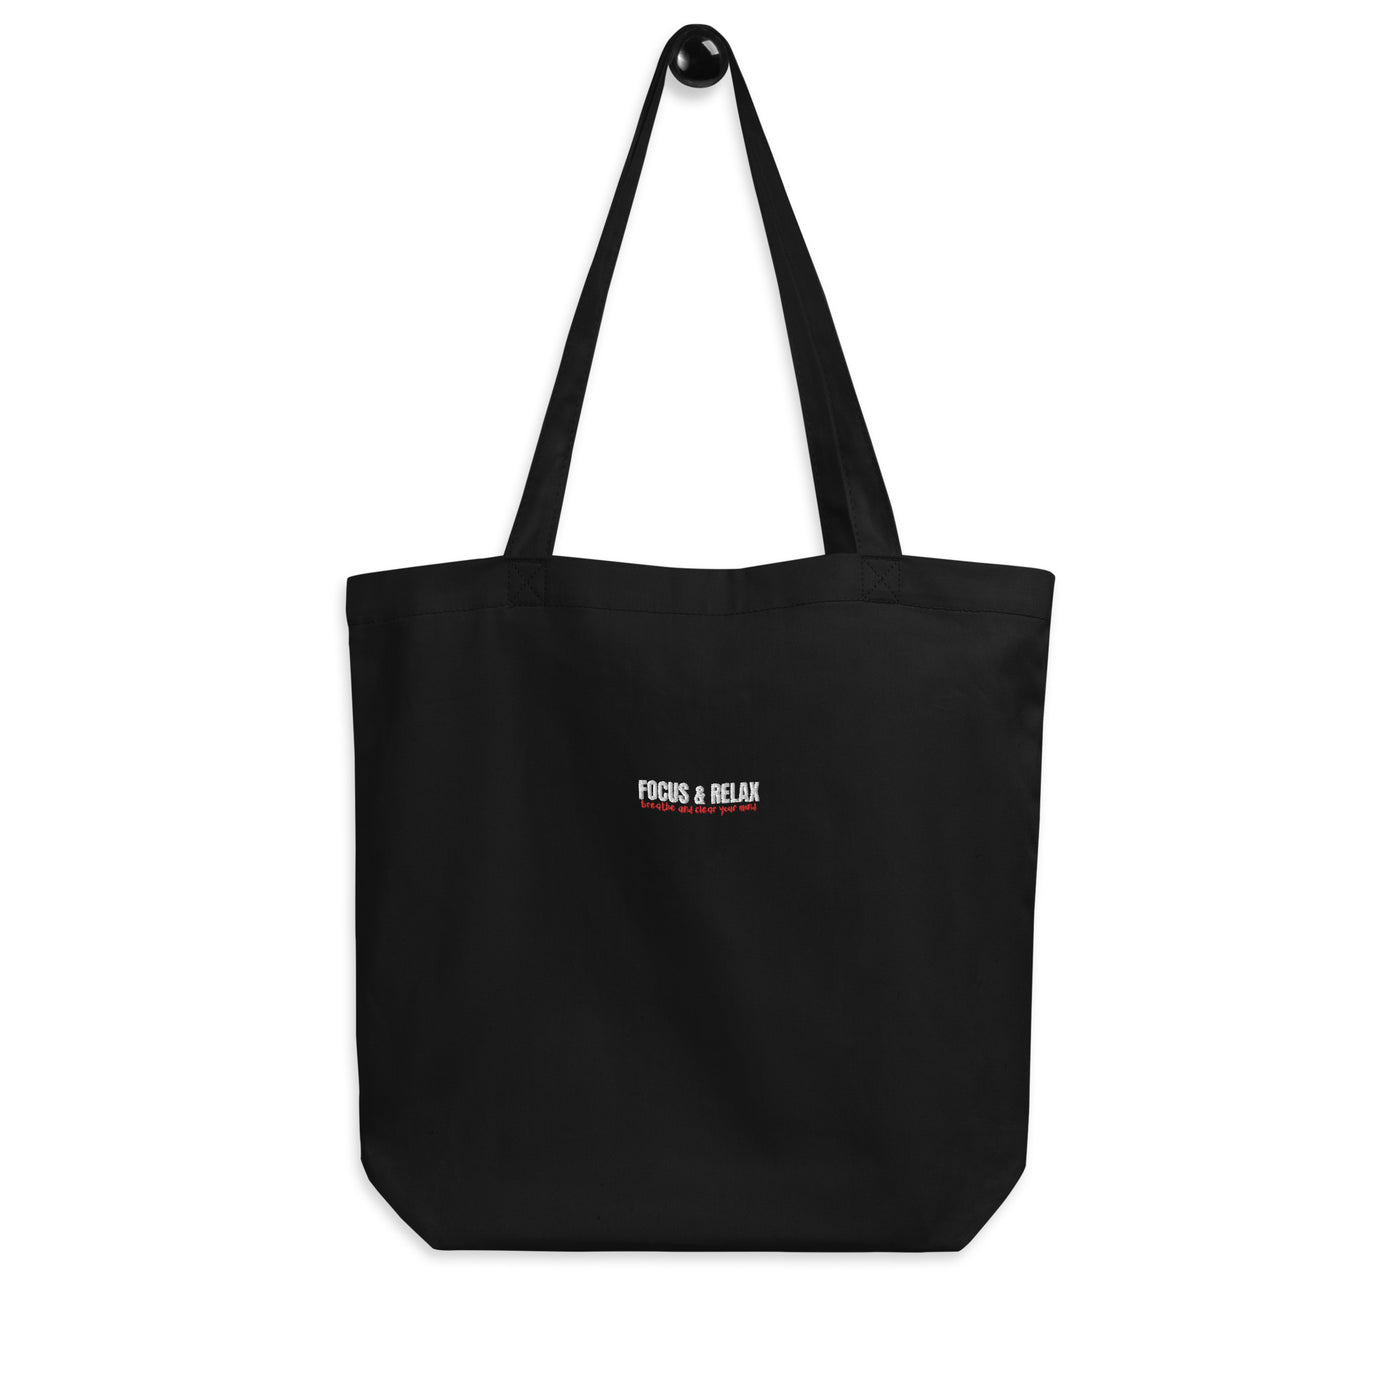 Eco Embroidered Black Tote Bag - Focus & Relax